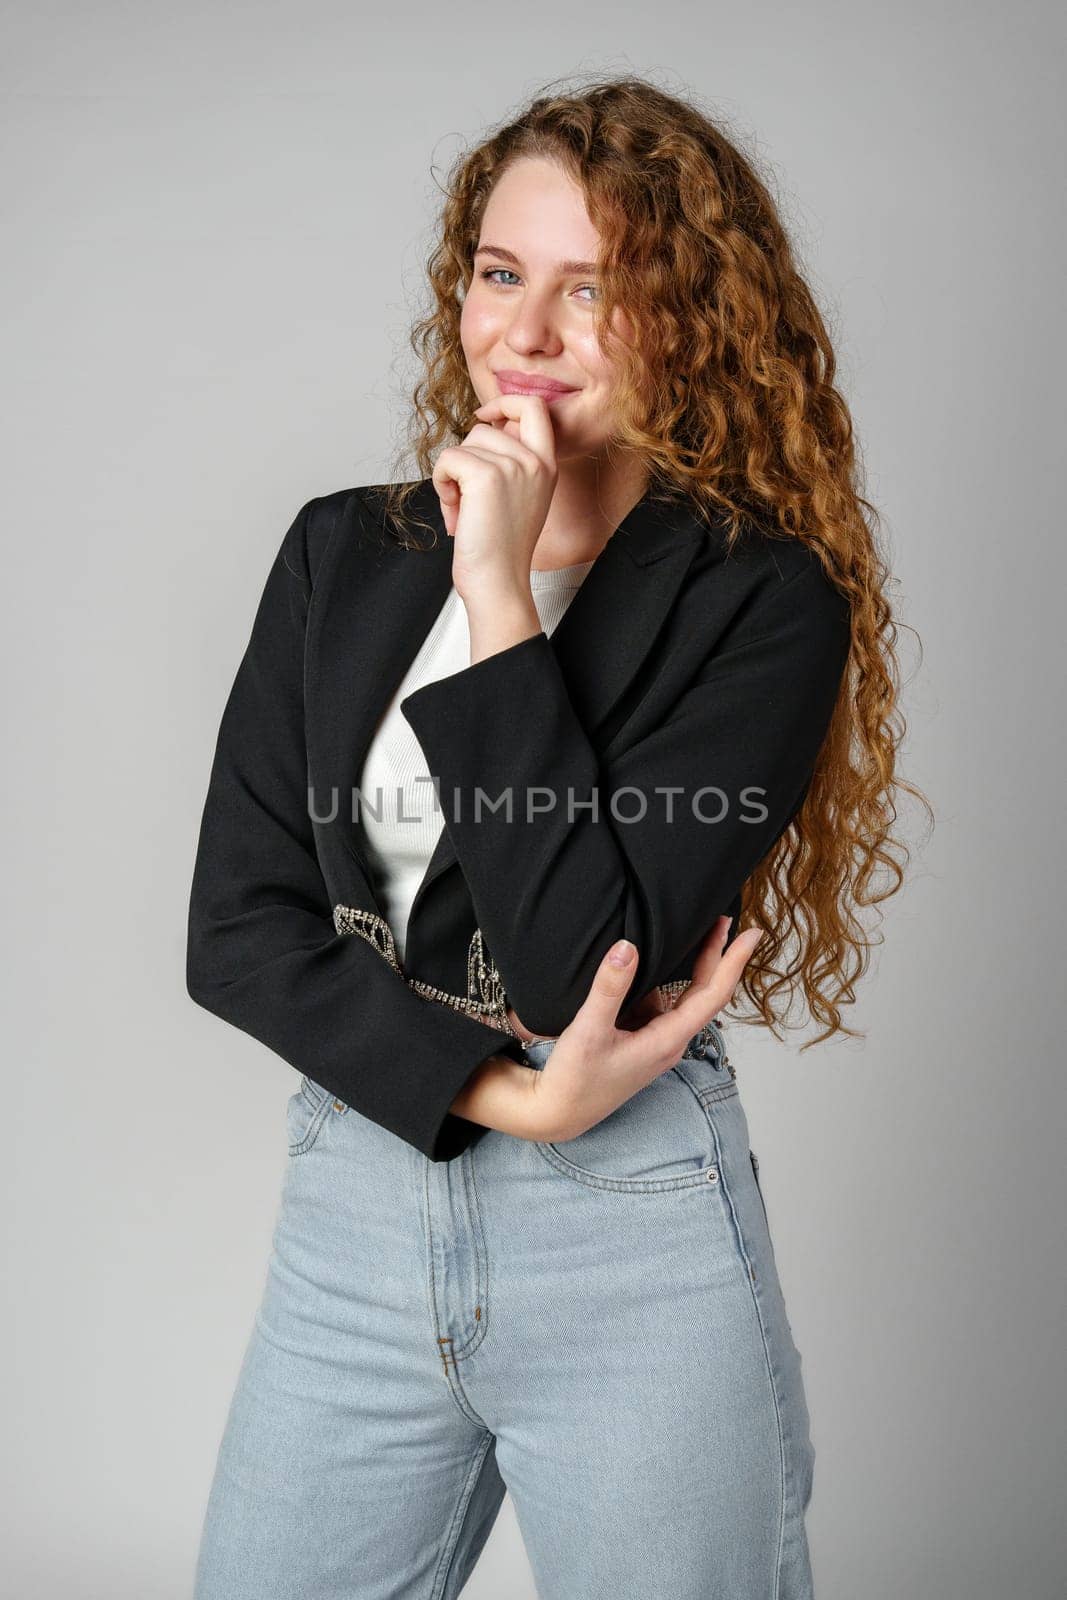 Thoughtful Young Woman Against Grey Background in Studio by Fabrikasimf